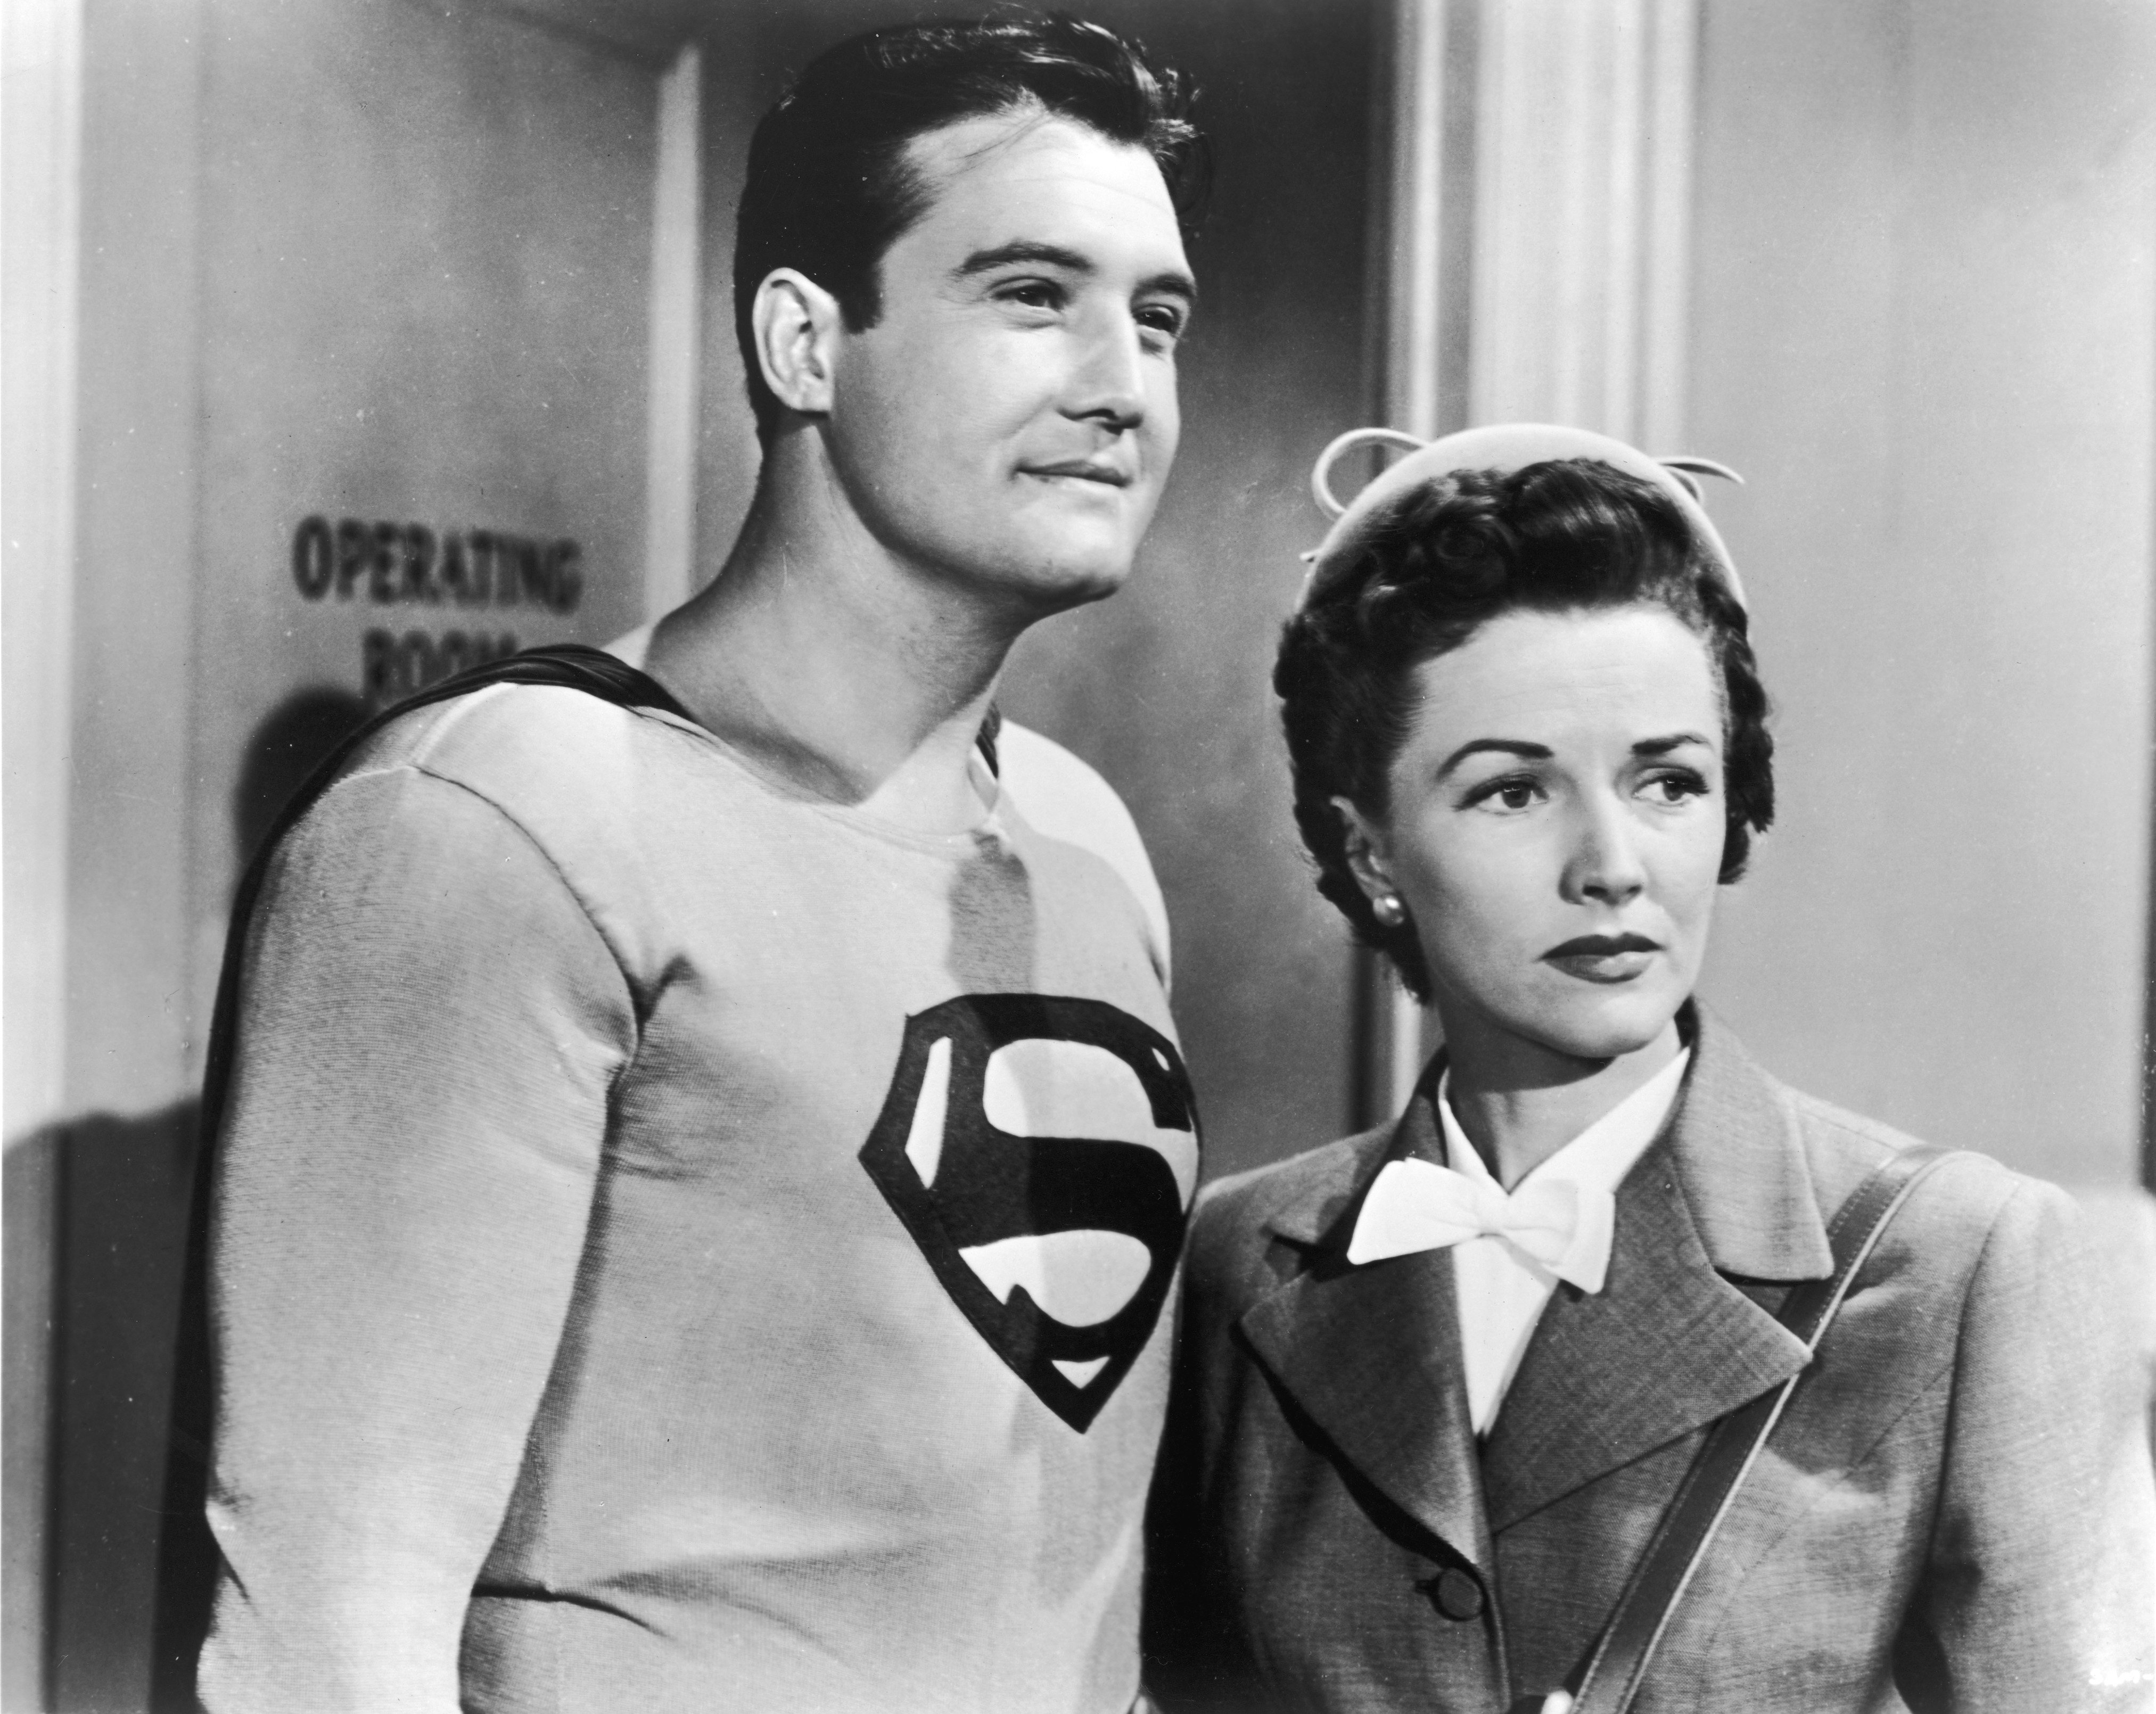 American actor George Reeves (1914 - 1959), as Superman, stands with Phyllis Coates, as Lois Lane, in a still from the television series, 'Adventures of Superman,' circa 1952. | Source: Getty Images